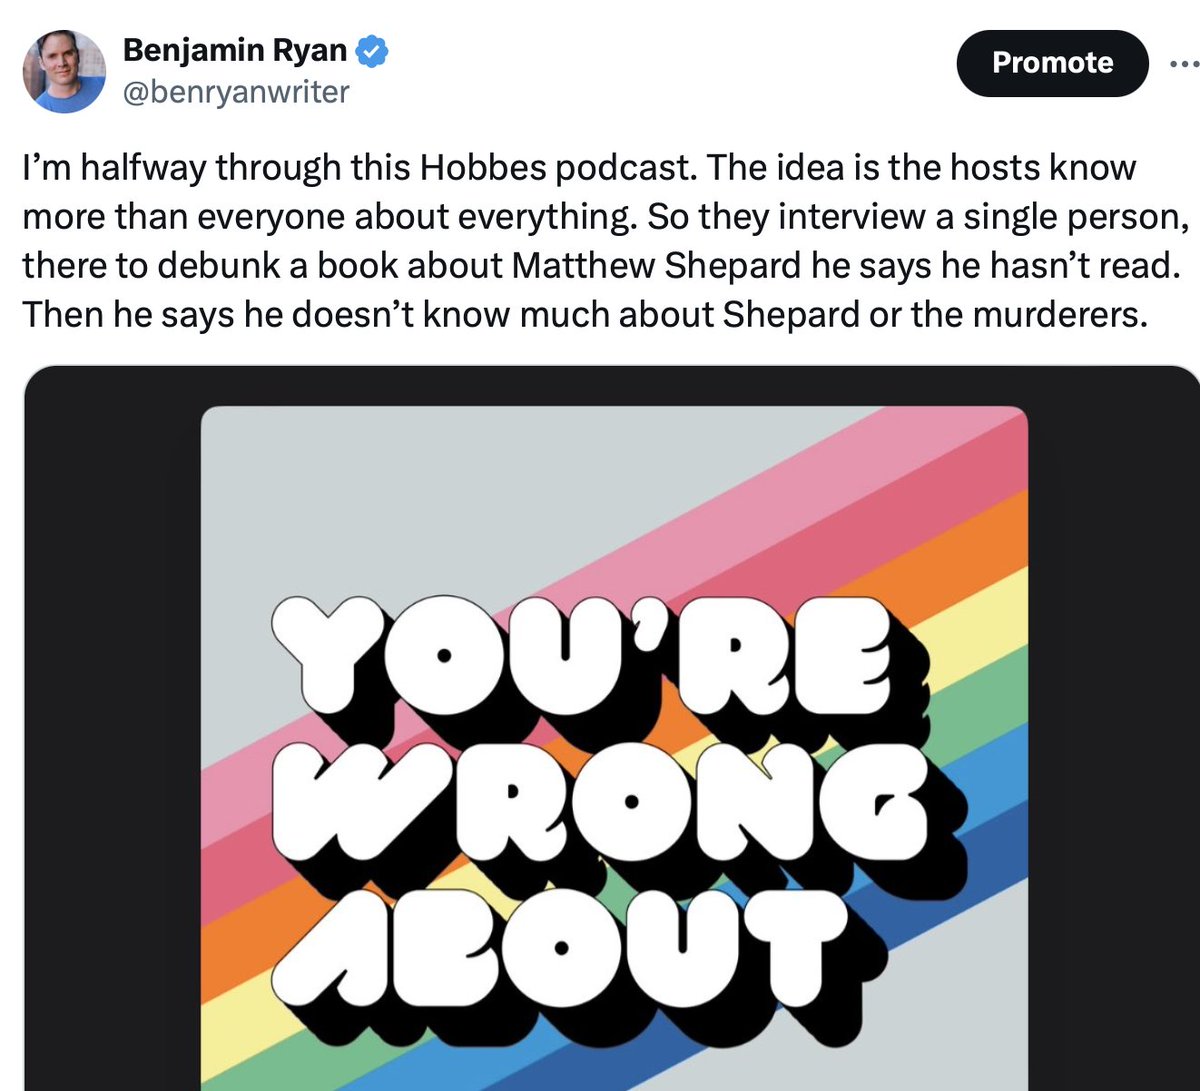 Michael Hobbes did a podcast debunking the book that debunked how Matthew Shepard died. Except that neither Hobbes, nor his cohost, nor their guest had read the book. But sure, let's call *me* uninformed for claiming that he often hasn't done the reading. x.com/benryanwriter/…